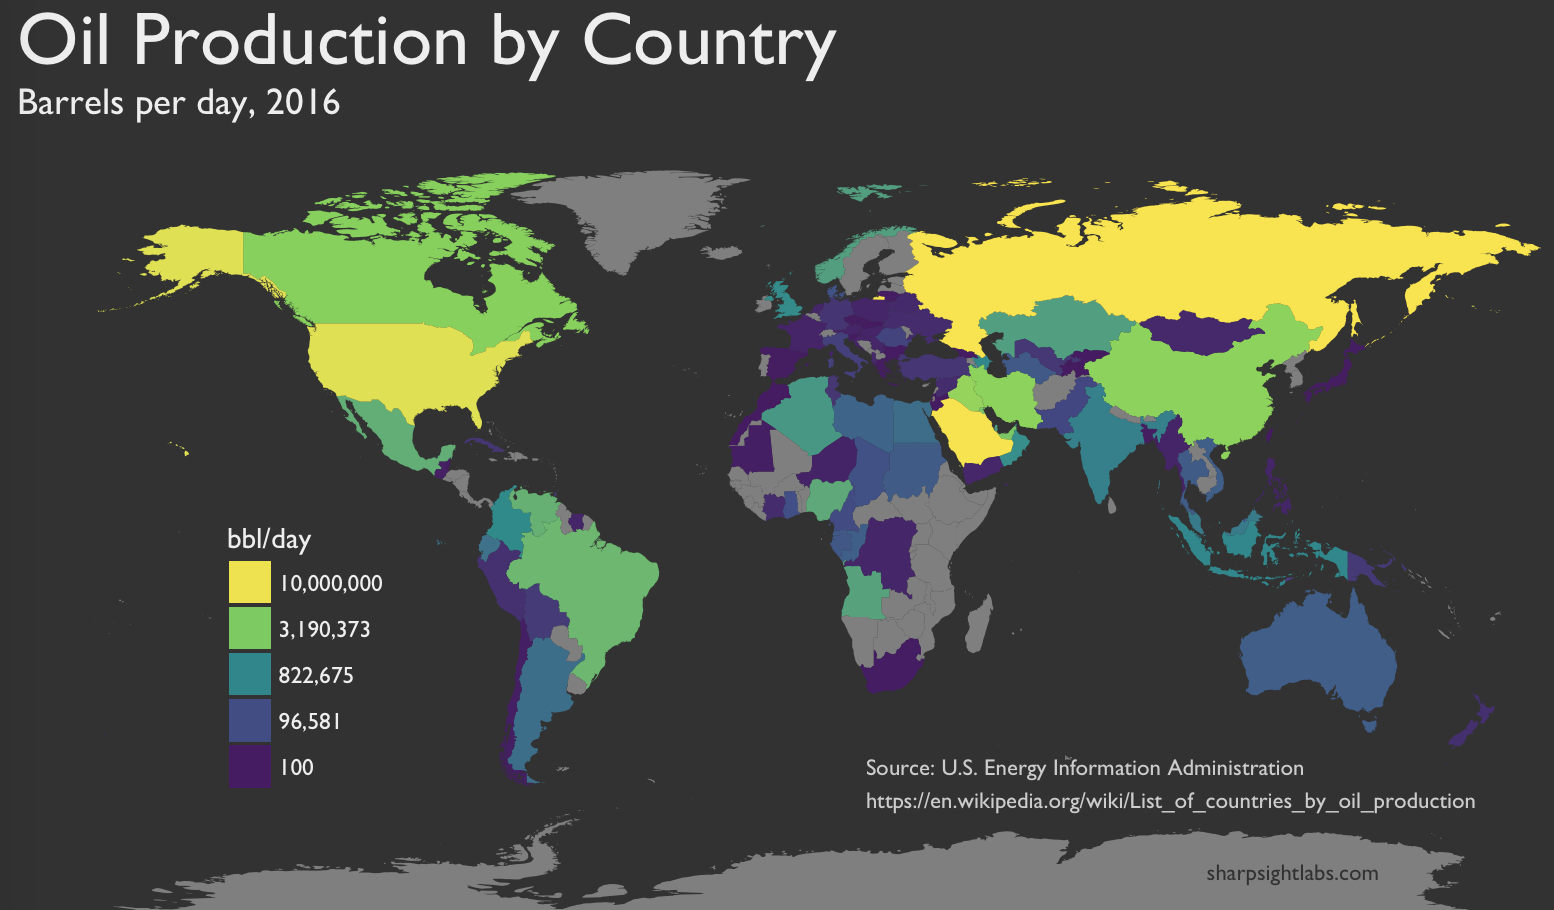 Transforming countries. Oil Production by Country. World Oil Map. ОПЕК на карте. Страны ОПЕК на карте.